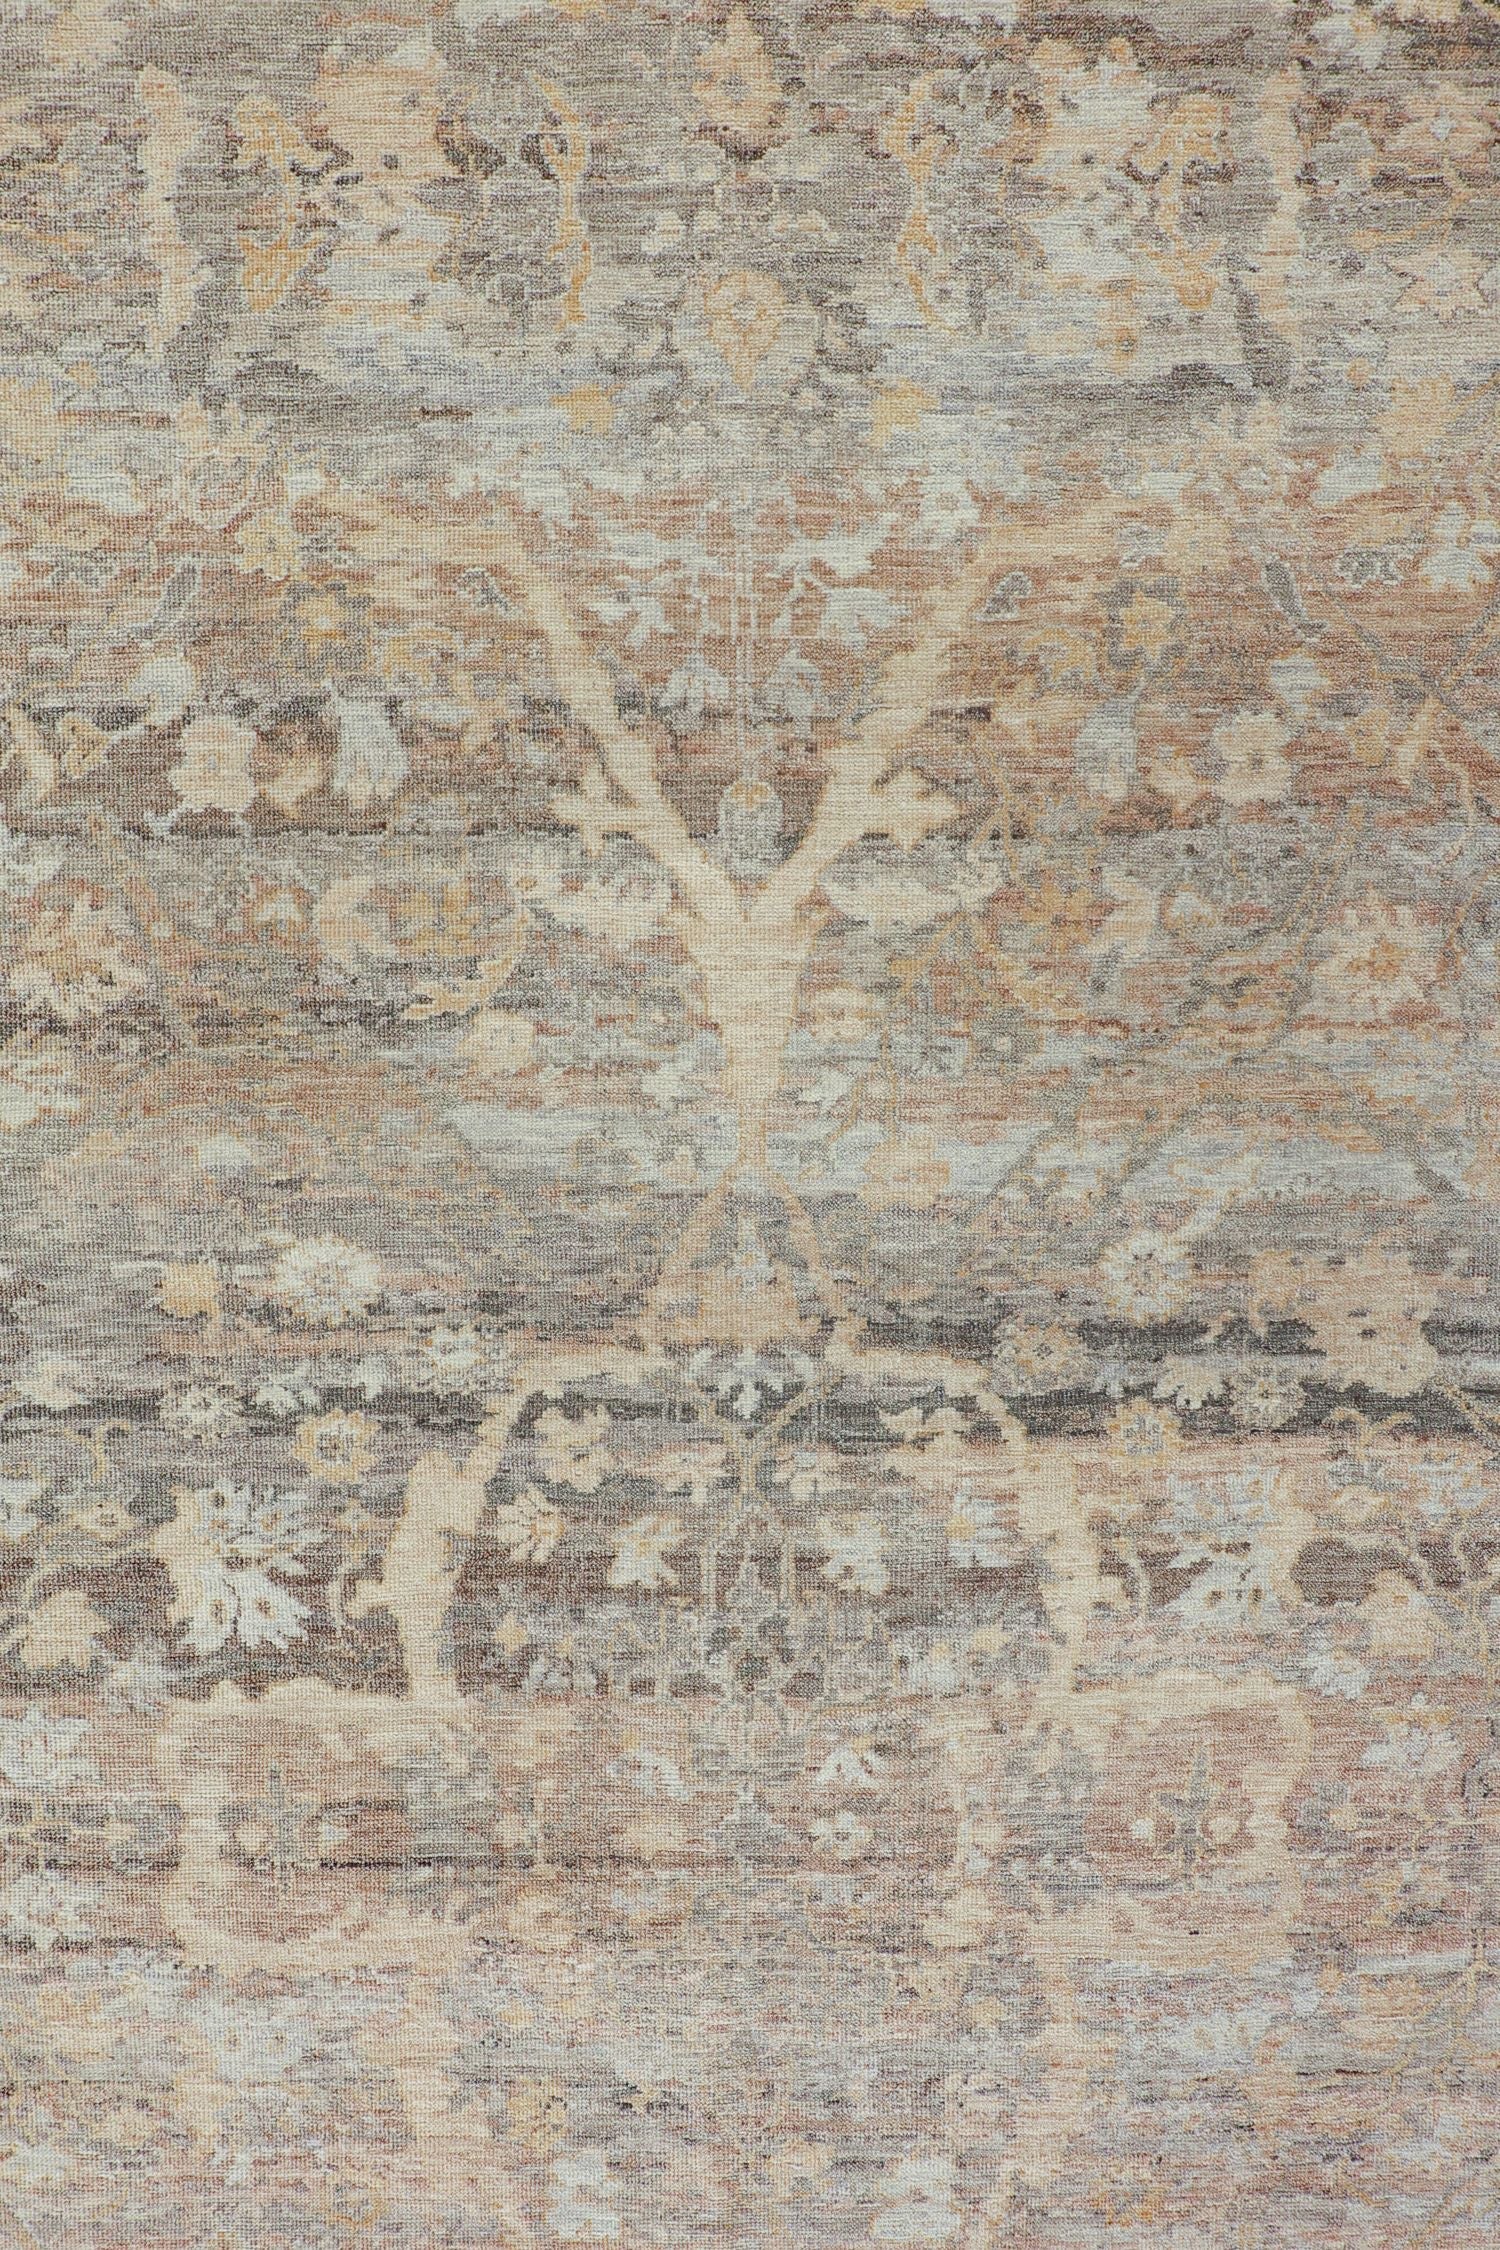 Sultanabad Handwoven Transitional Rug, J72024